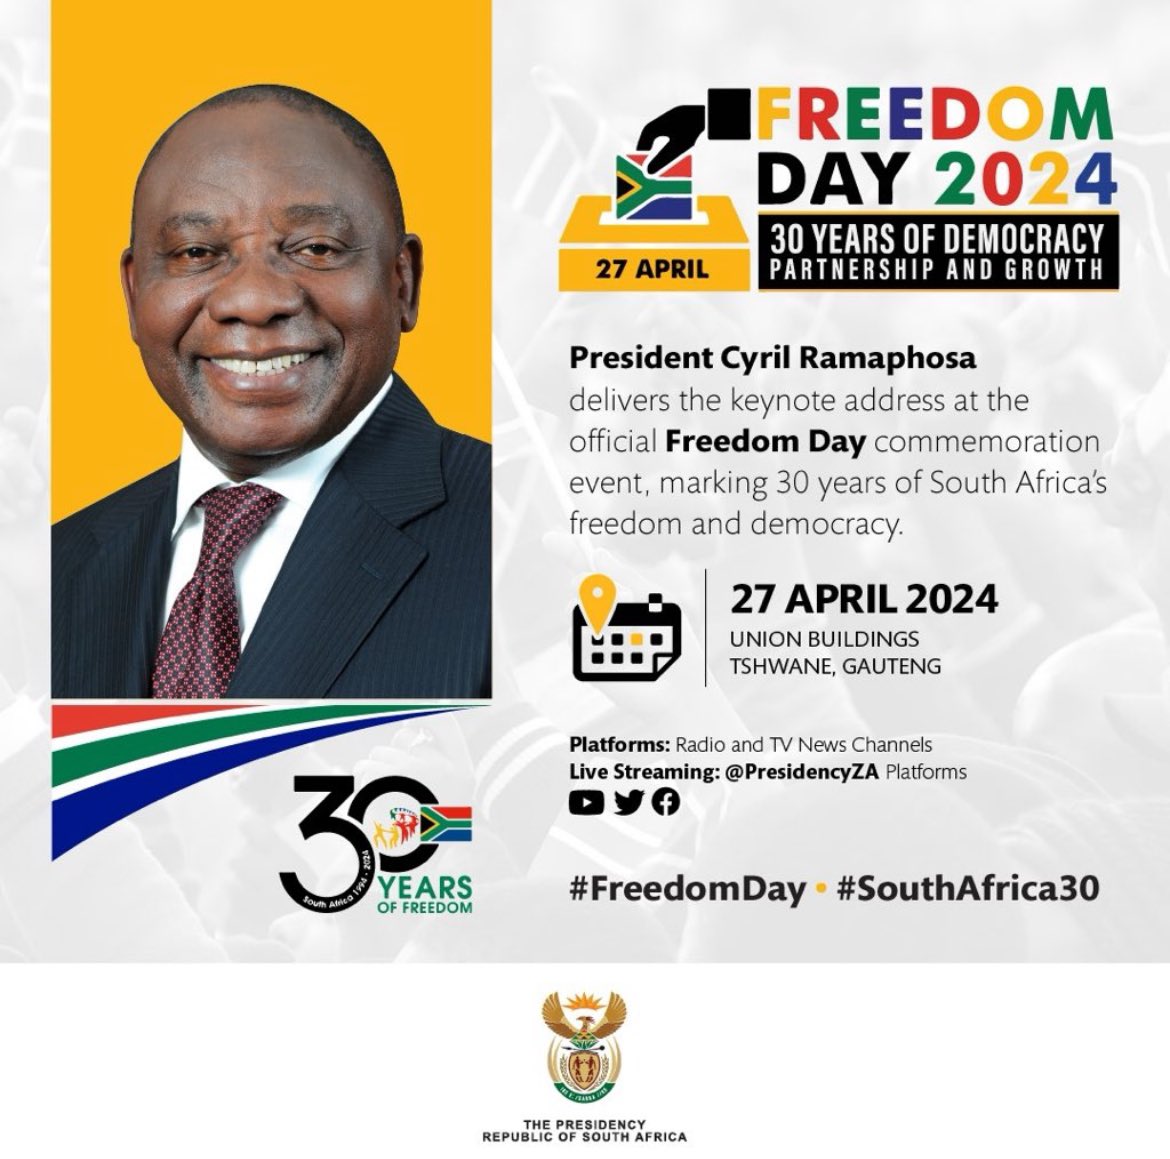 30 years ago today, SA took its first steps to freedom, with many SAfricans voting for the first time in a democratic election. As SA reaches this historic milestone, President Cyril Ramaphosa will lead the 2024 #FreedomDay national celebrations at the Union Buildings in PTA.